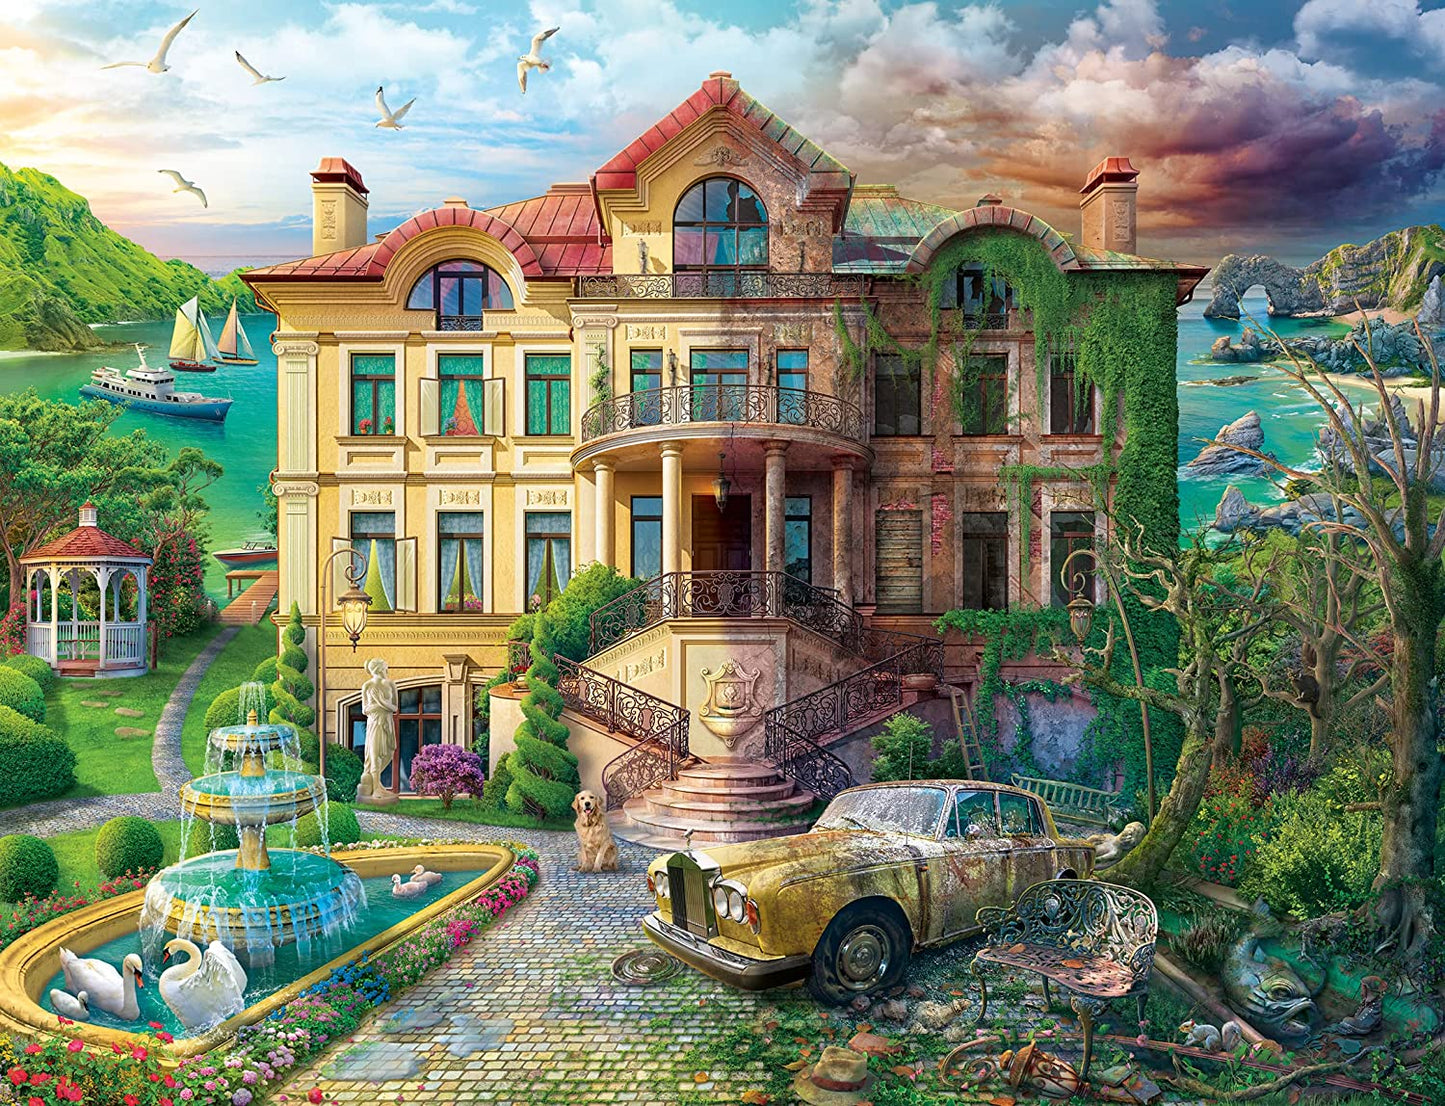 Ravensburger - Now & Then, Cove Manor Echoes - 2000 Piece Jigsaw Puzzle